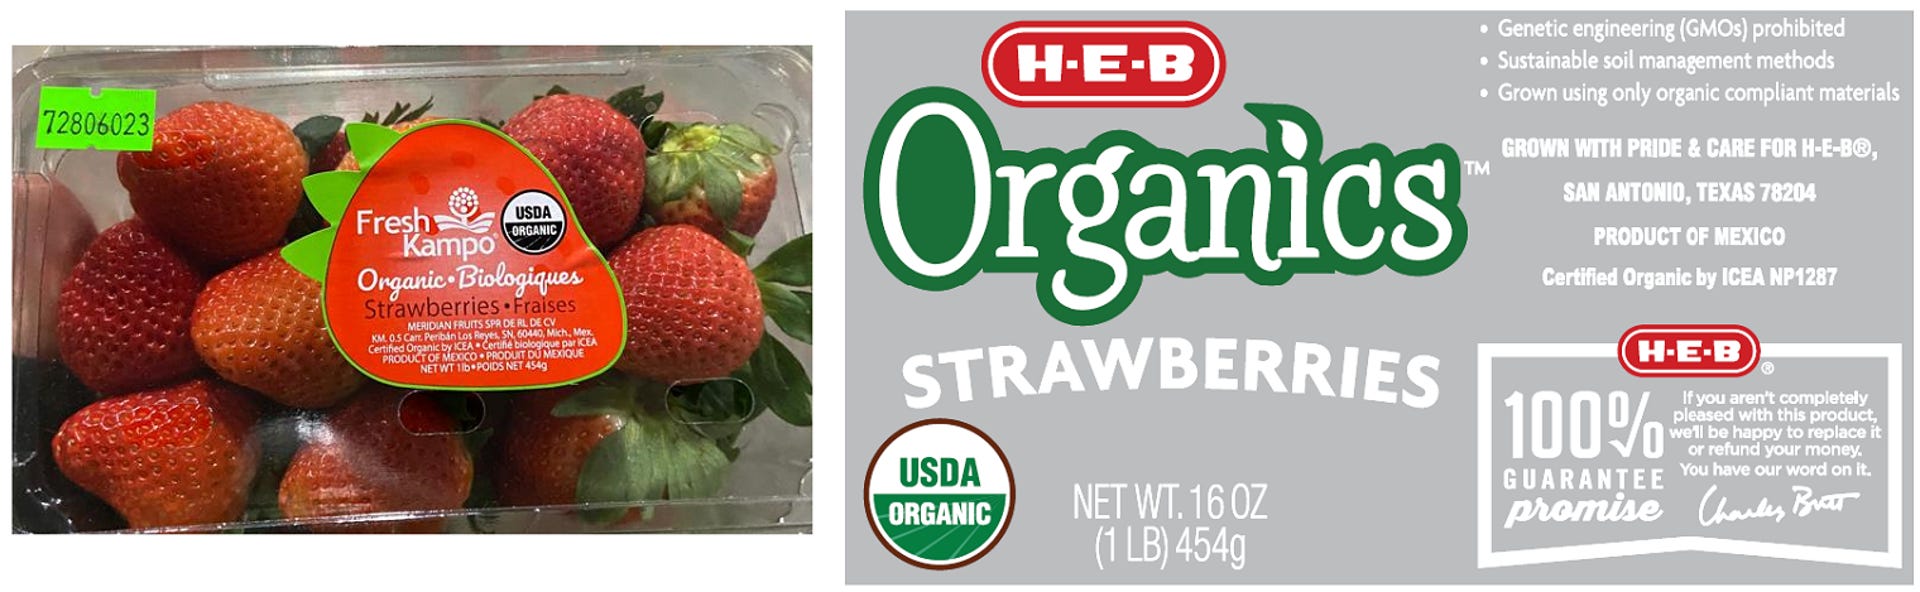 How to clean strawberries to avoid hepatitis A?